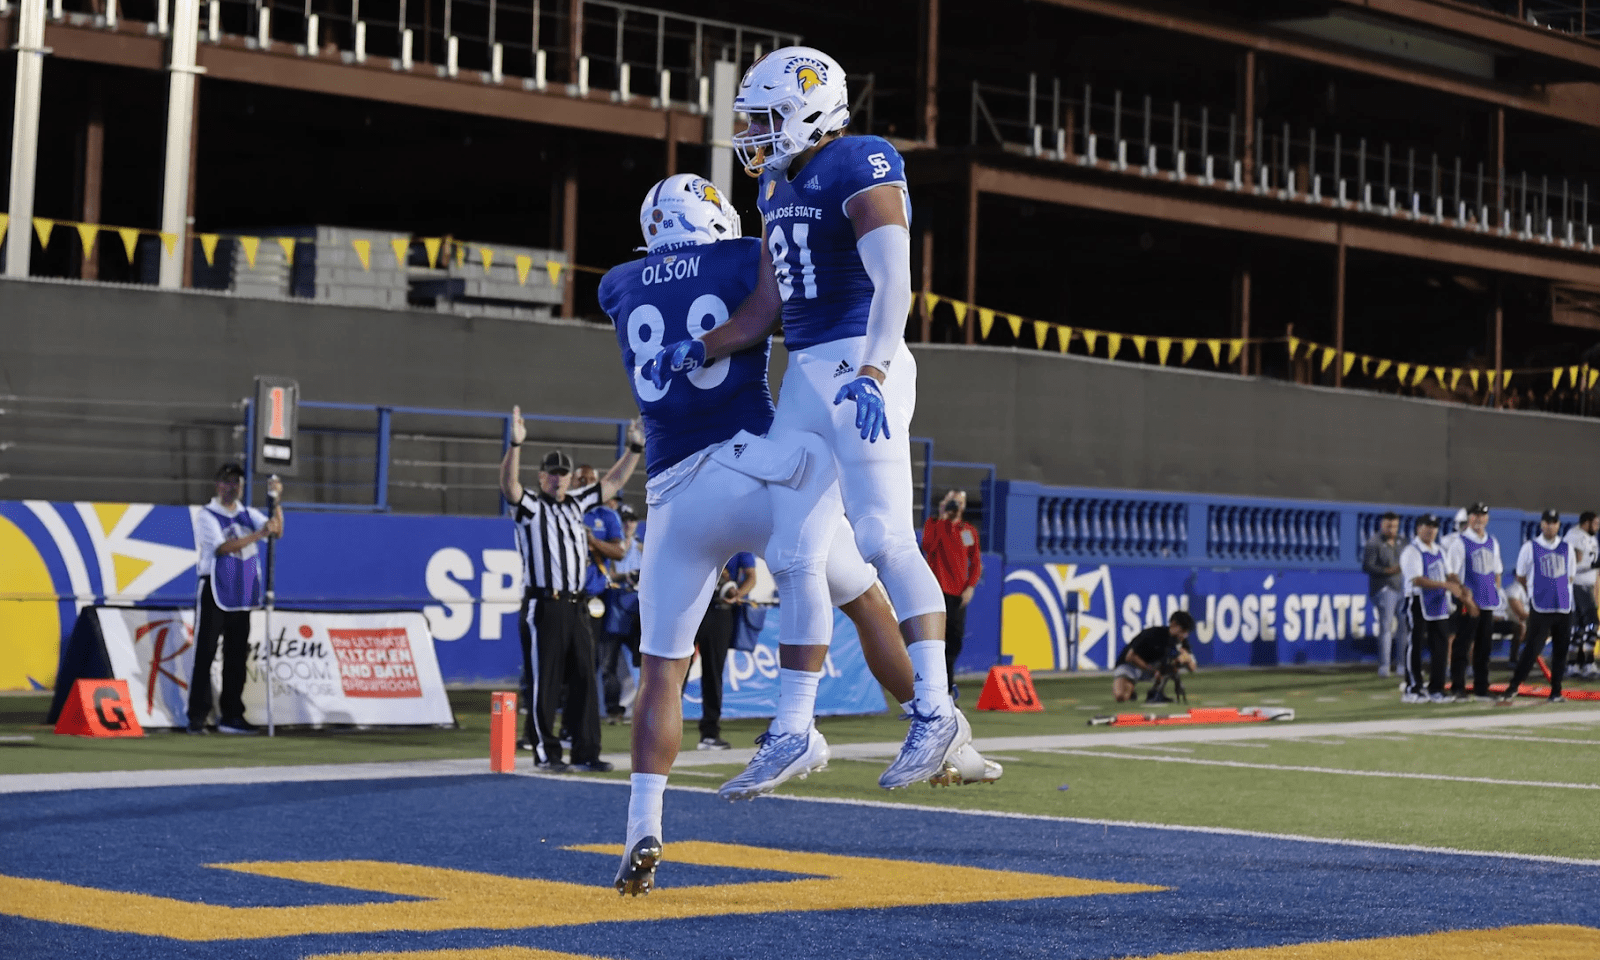 Dominick Mazotti is a reliable target at TE in San Jose State's offense. By making strides this season, Mazotti can put himself on the map for pro scouts. Hula Bowl scout Chris Spooner breaks down Mazotti as an NFL Prospect in his report.